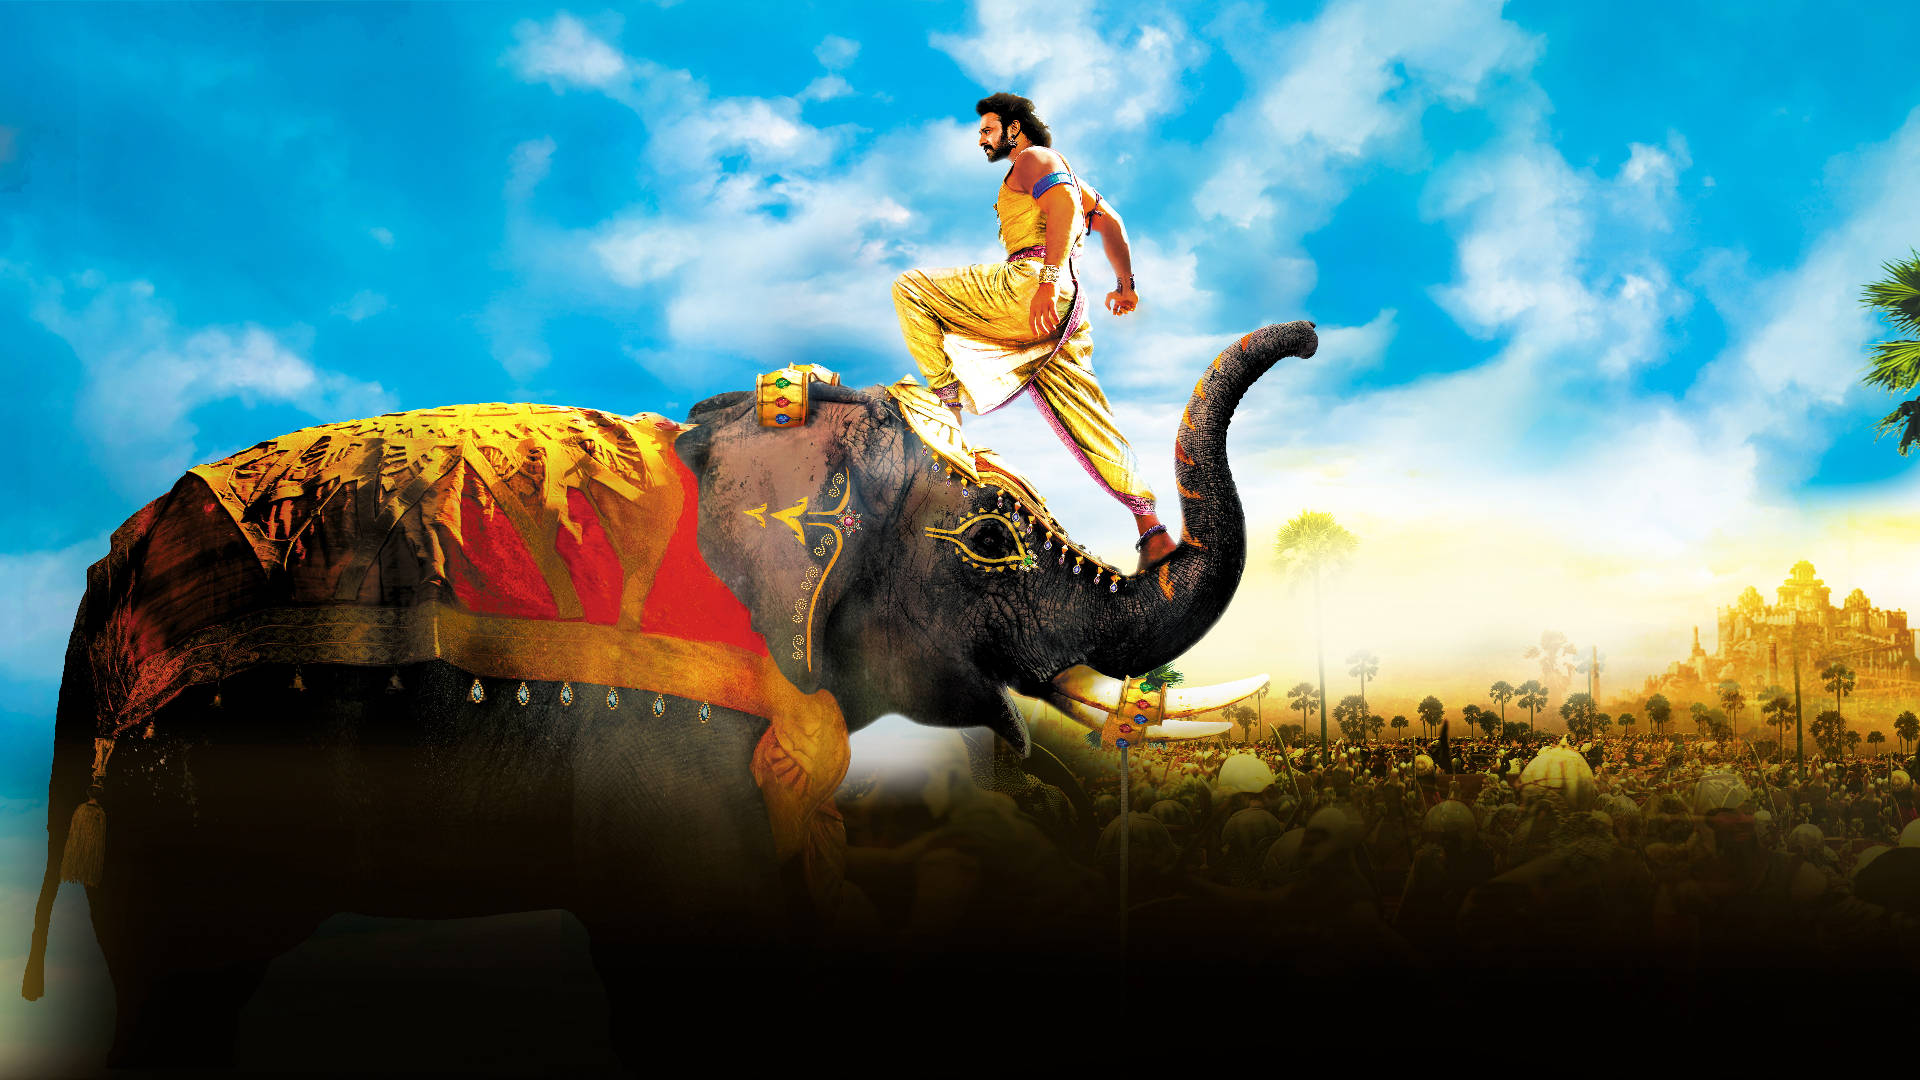 Bahubali Photos: HD Images, Pictures, Stills, First Look Posters of Bahubali  Movie - FilmiBeat